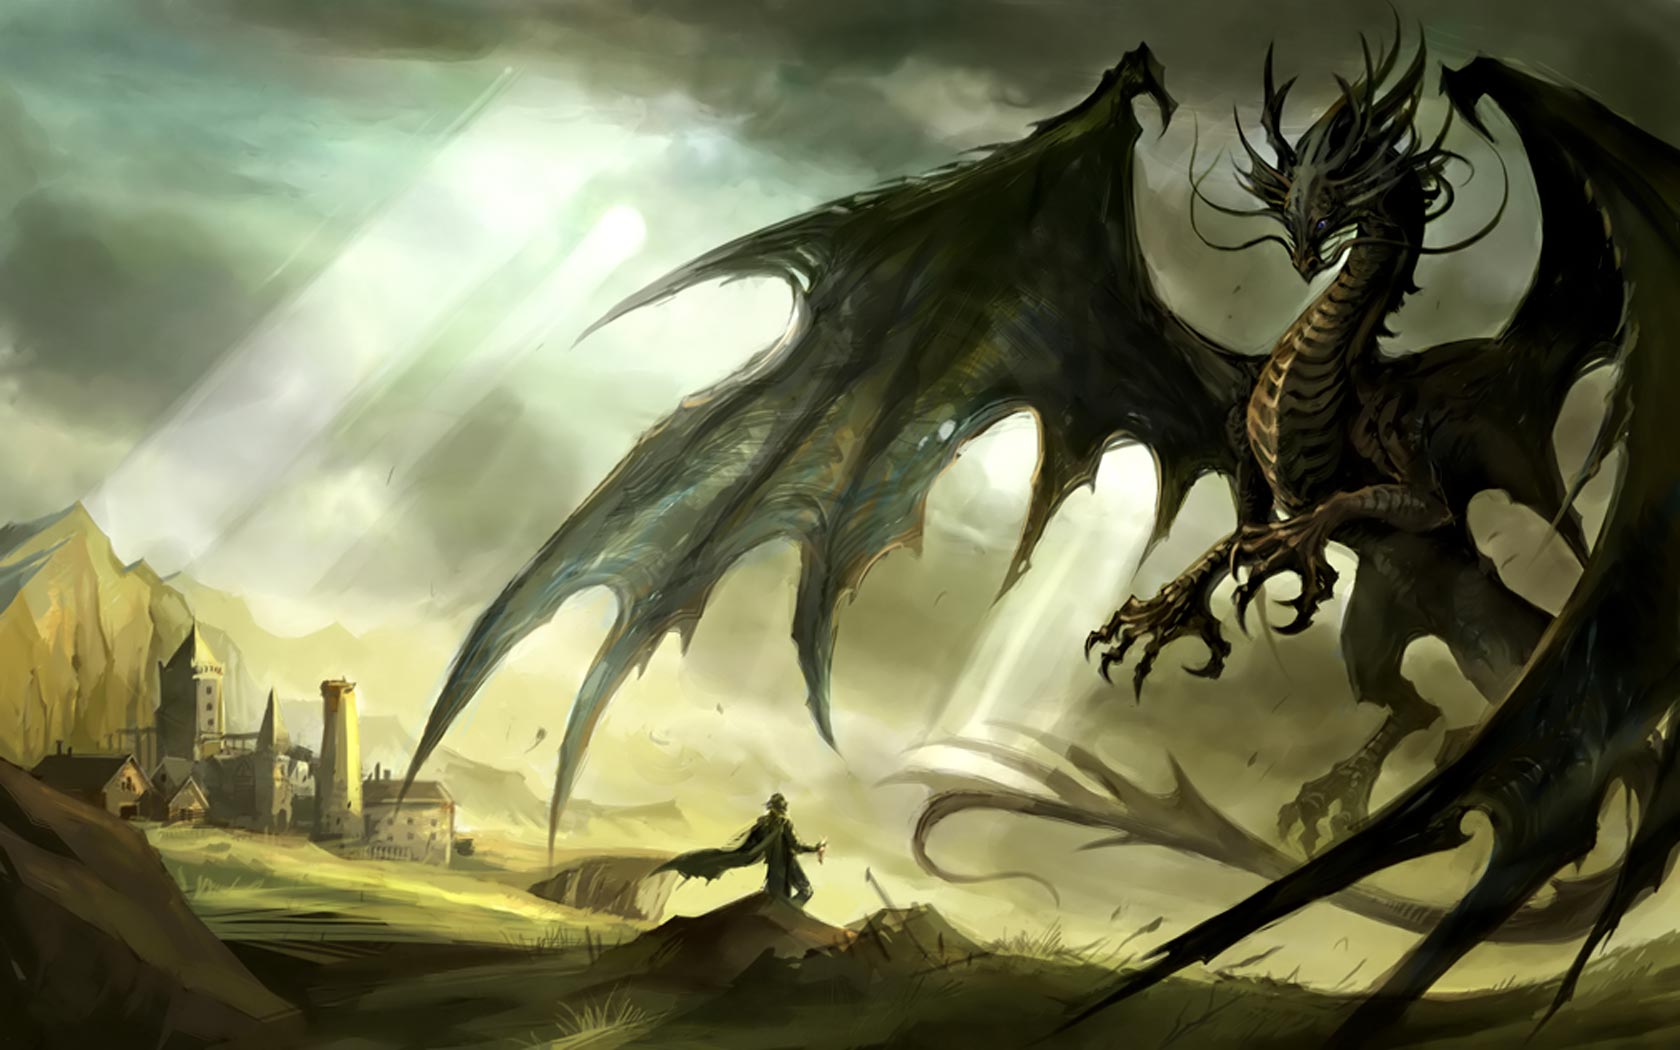 Free download awesome dragon desktop wallpaper share this awesome